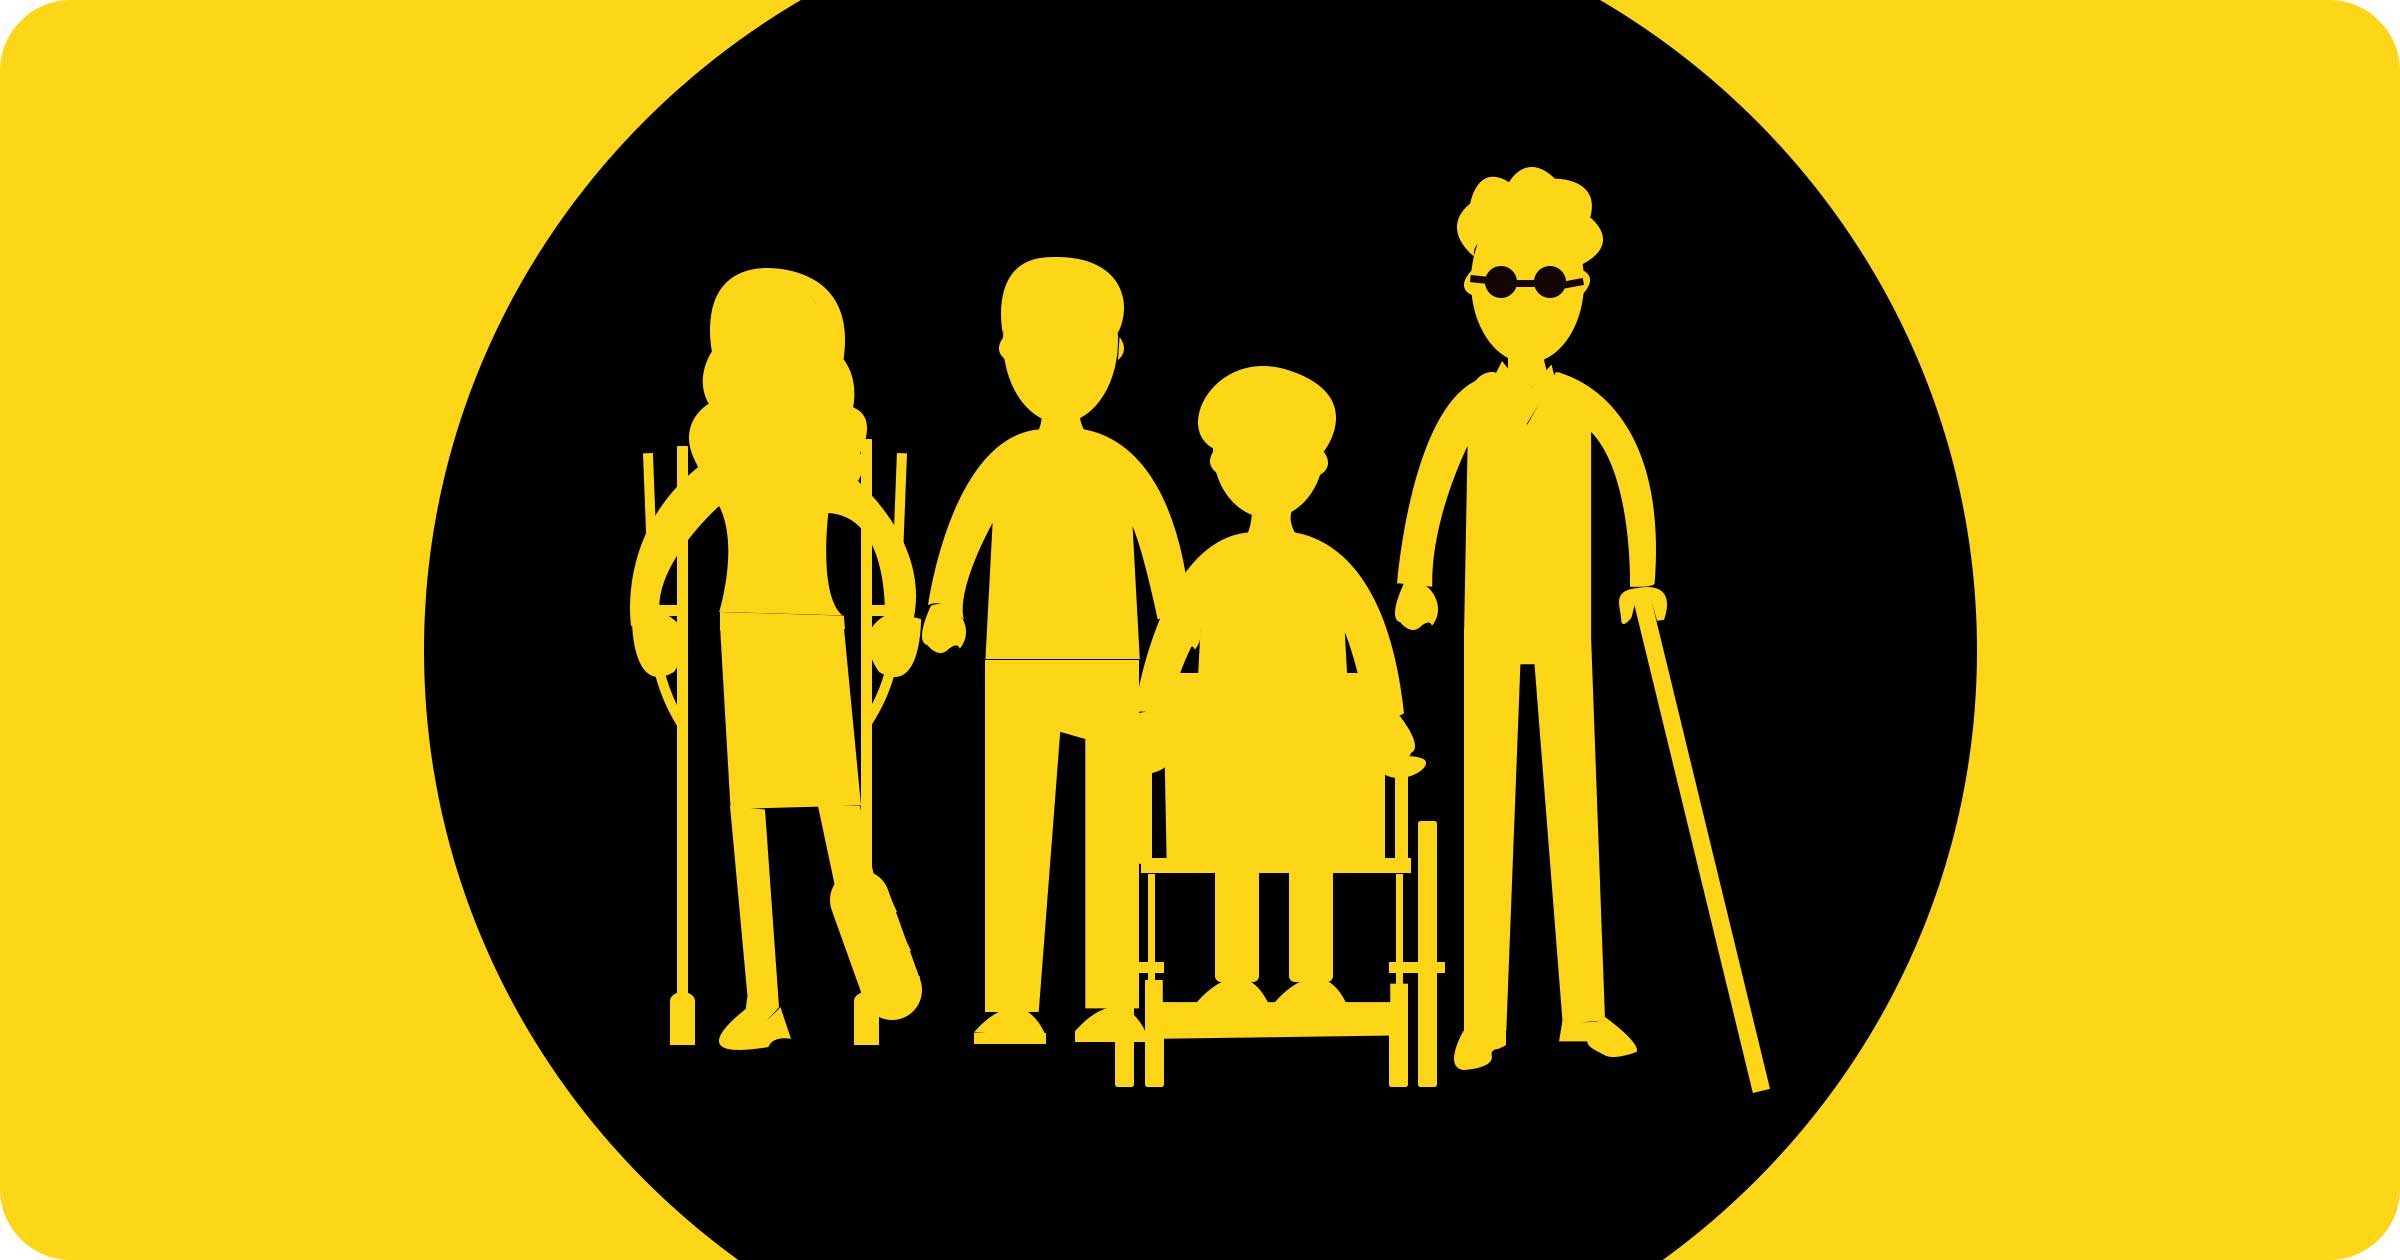 Emergency Evacuation Procedures For People With Disabilities